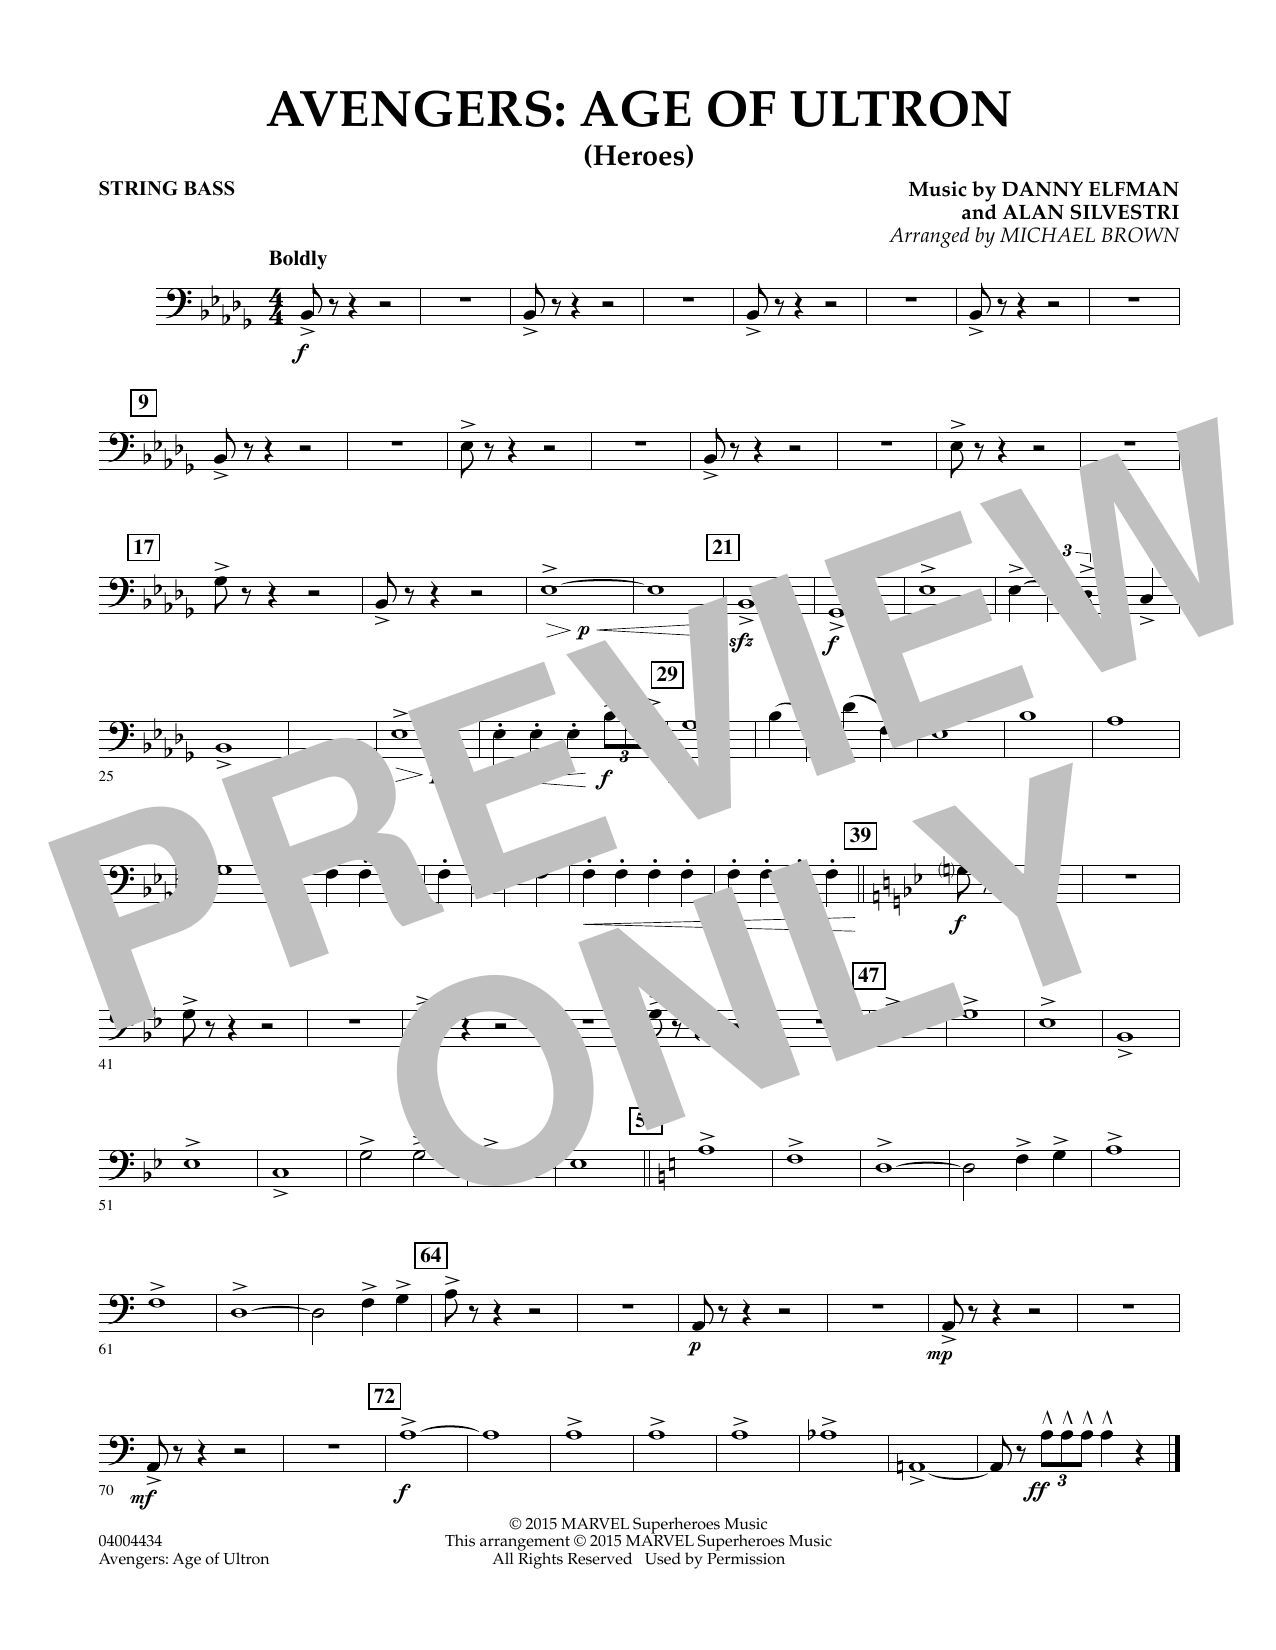 Michael Brown Avengers: The Age of Ultron (Main Theme) - String Bass sheet music notes and chords. Download Printable PDF.